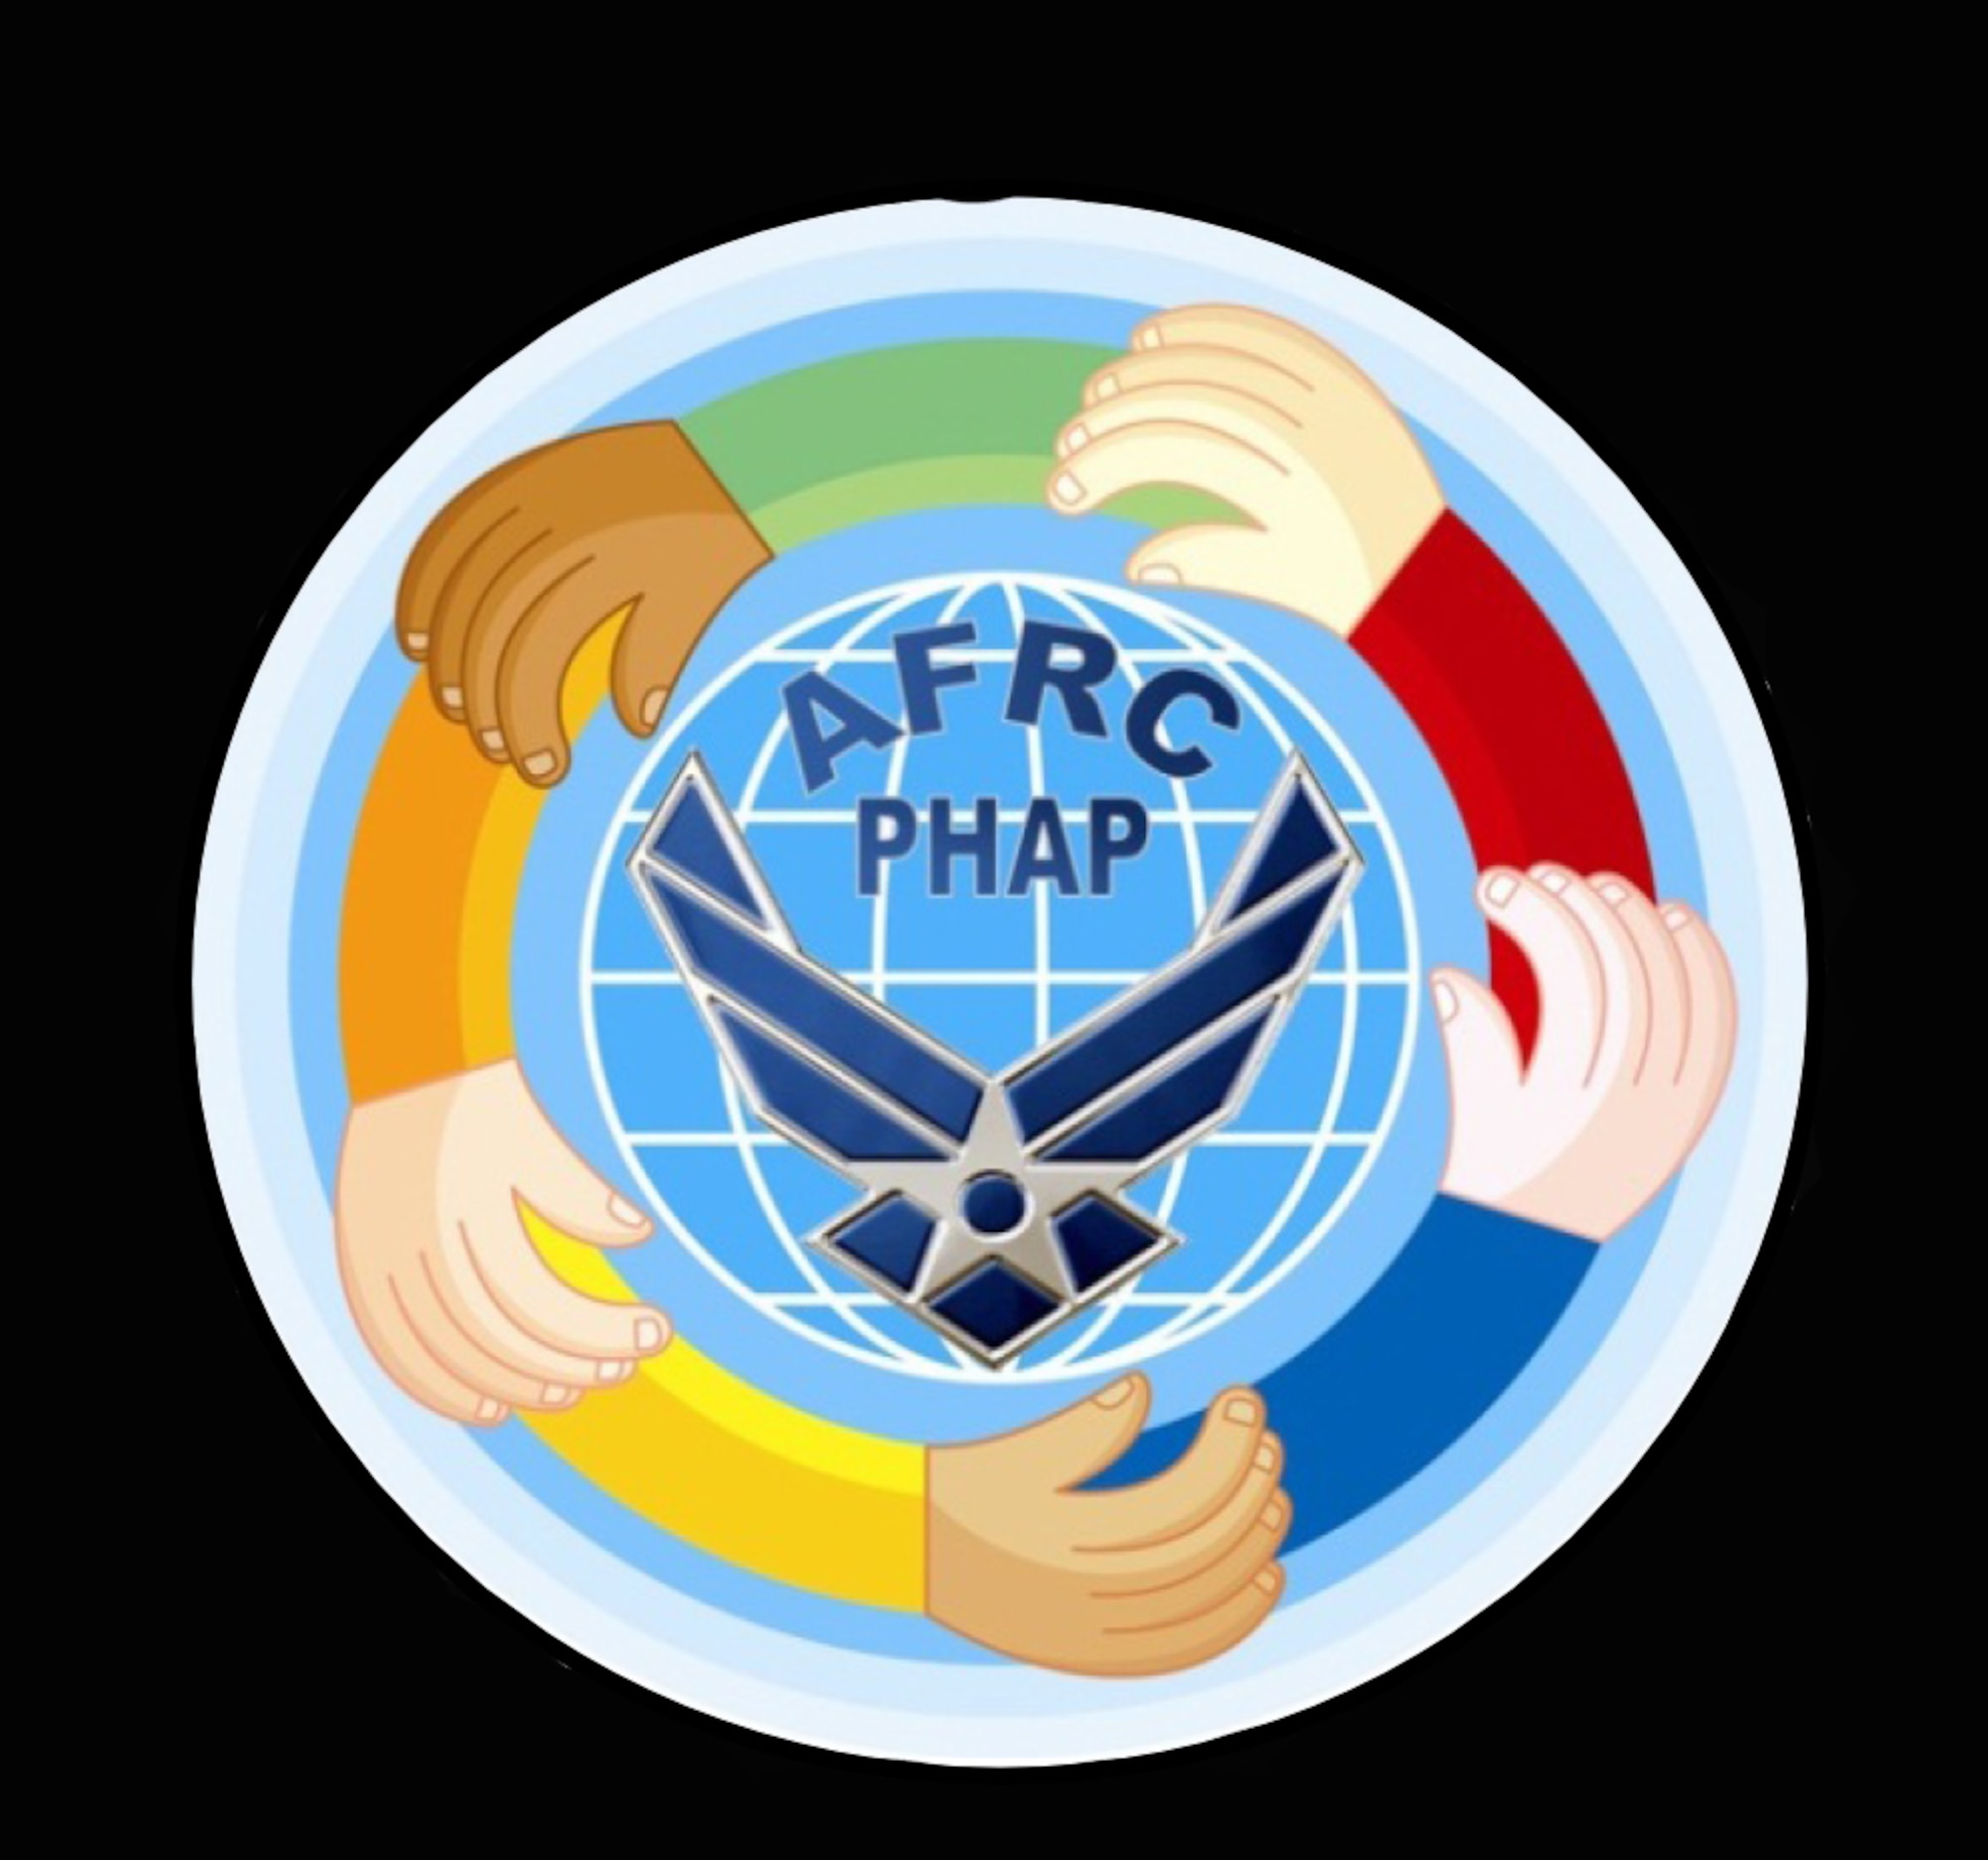 AFRC PHAP Trifold Graphic